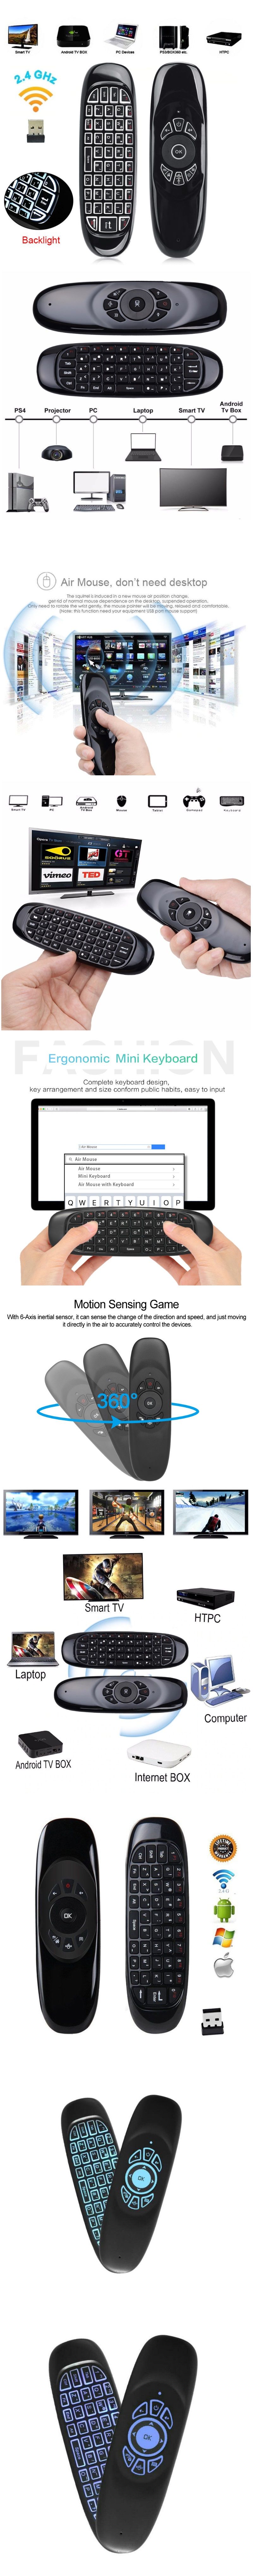 C120-24GHz-Air-Mouse-6-Gyro-Fly-Air-Mouse-Remote-Control-Mini-Keyboard-for-Android-Smart-TV-Box-1614161